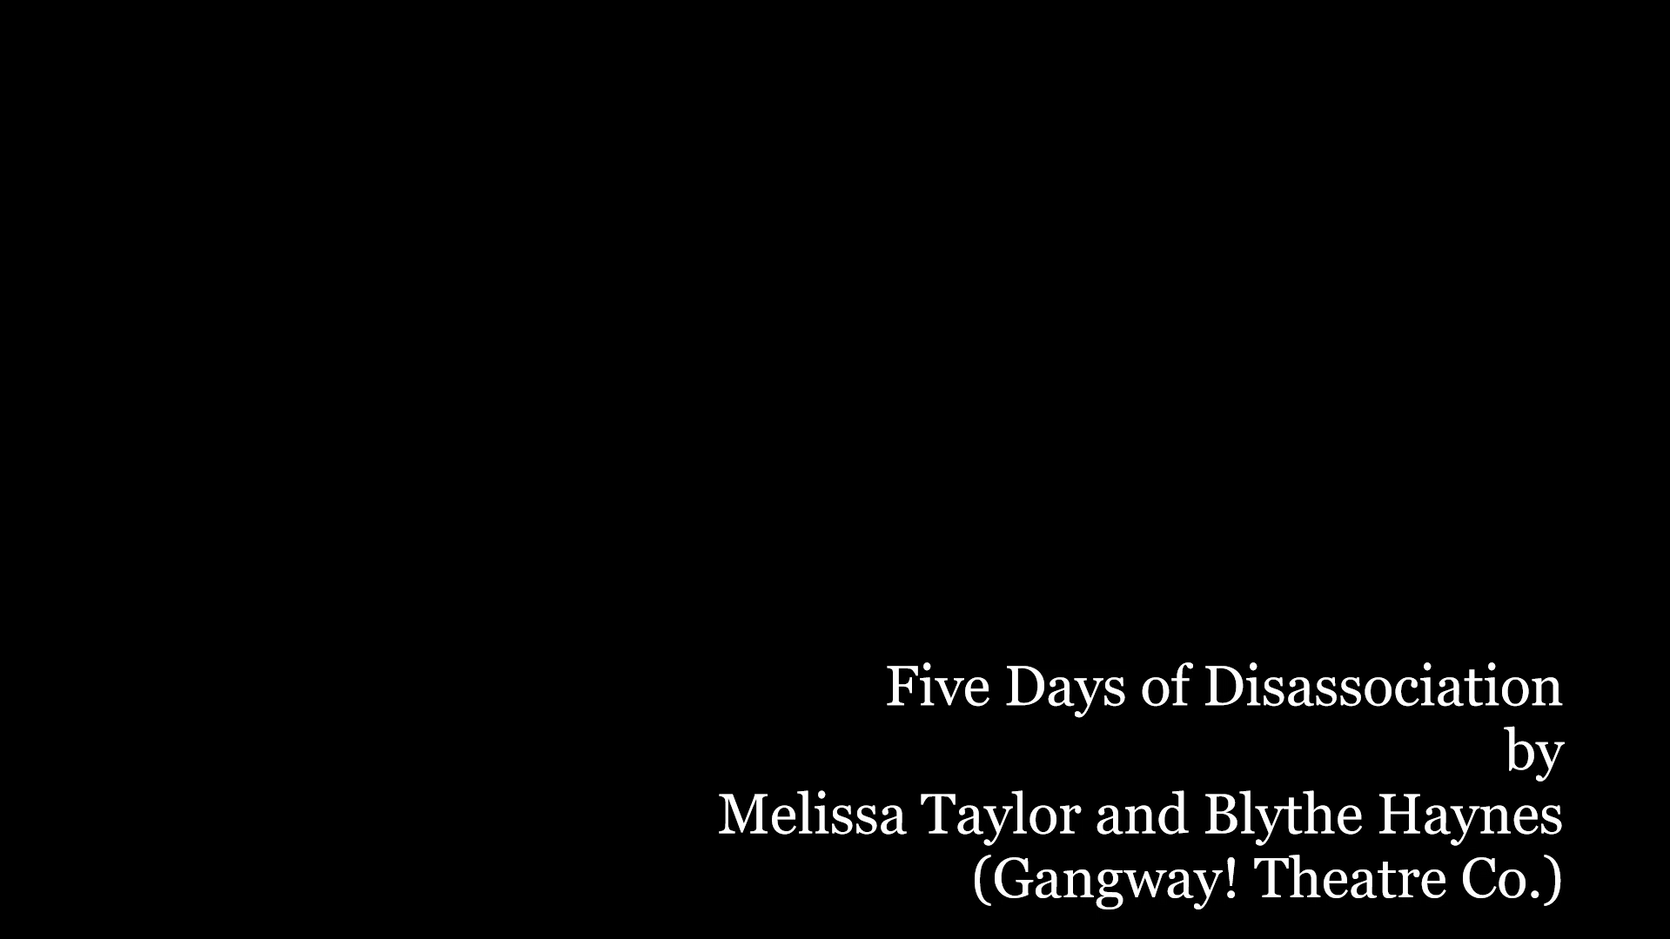 Five Days of Disassociation_Gangway! Theatre Co.